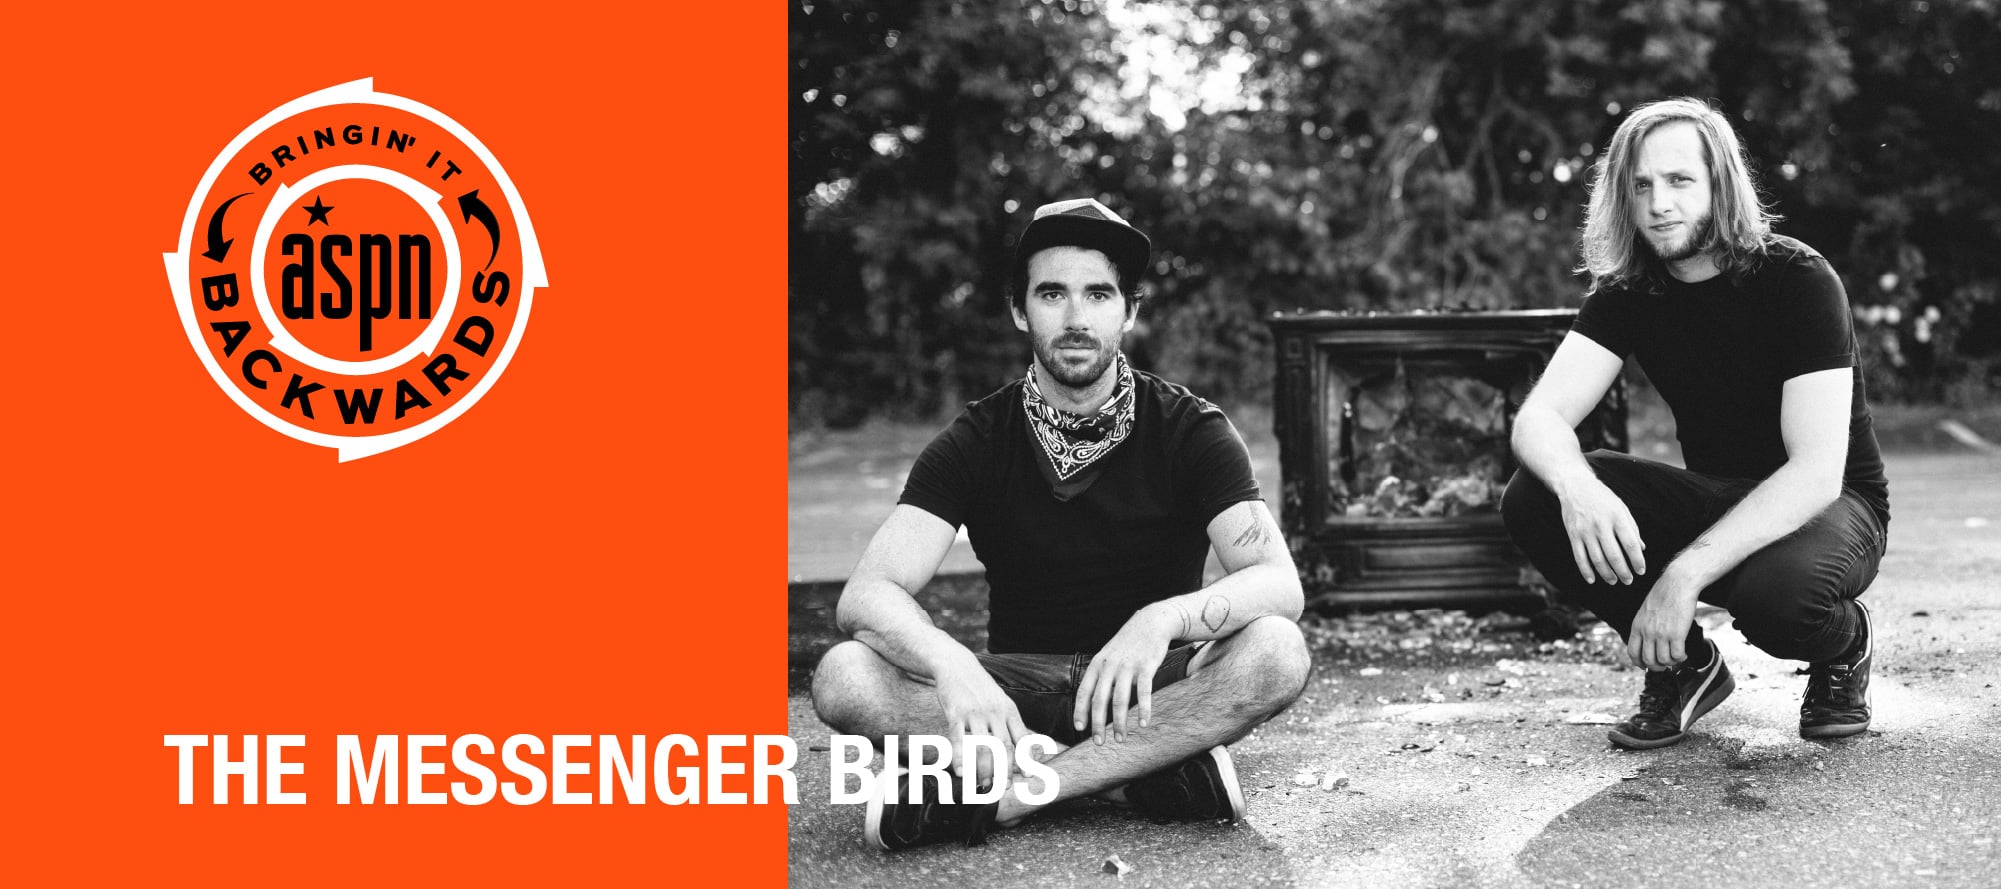 Bringin’ it Backwards: Interview with The Messenger Birds